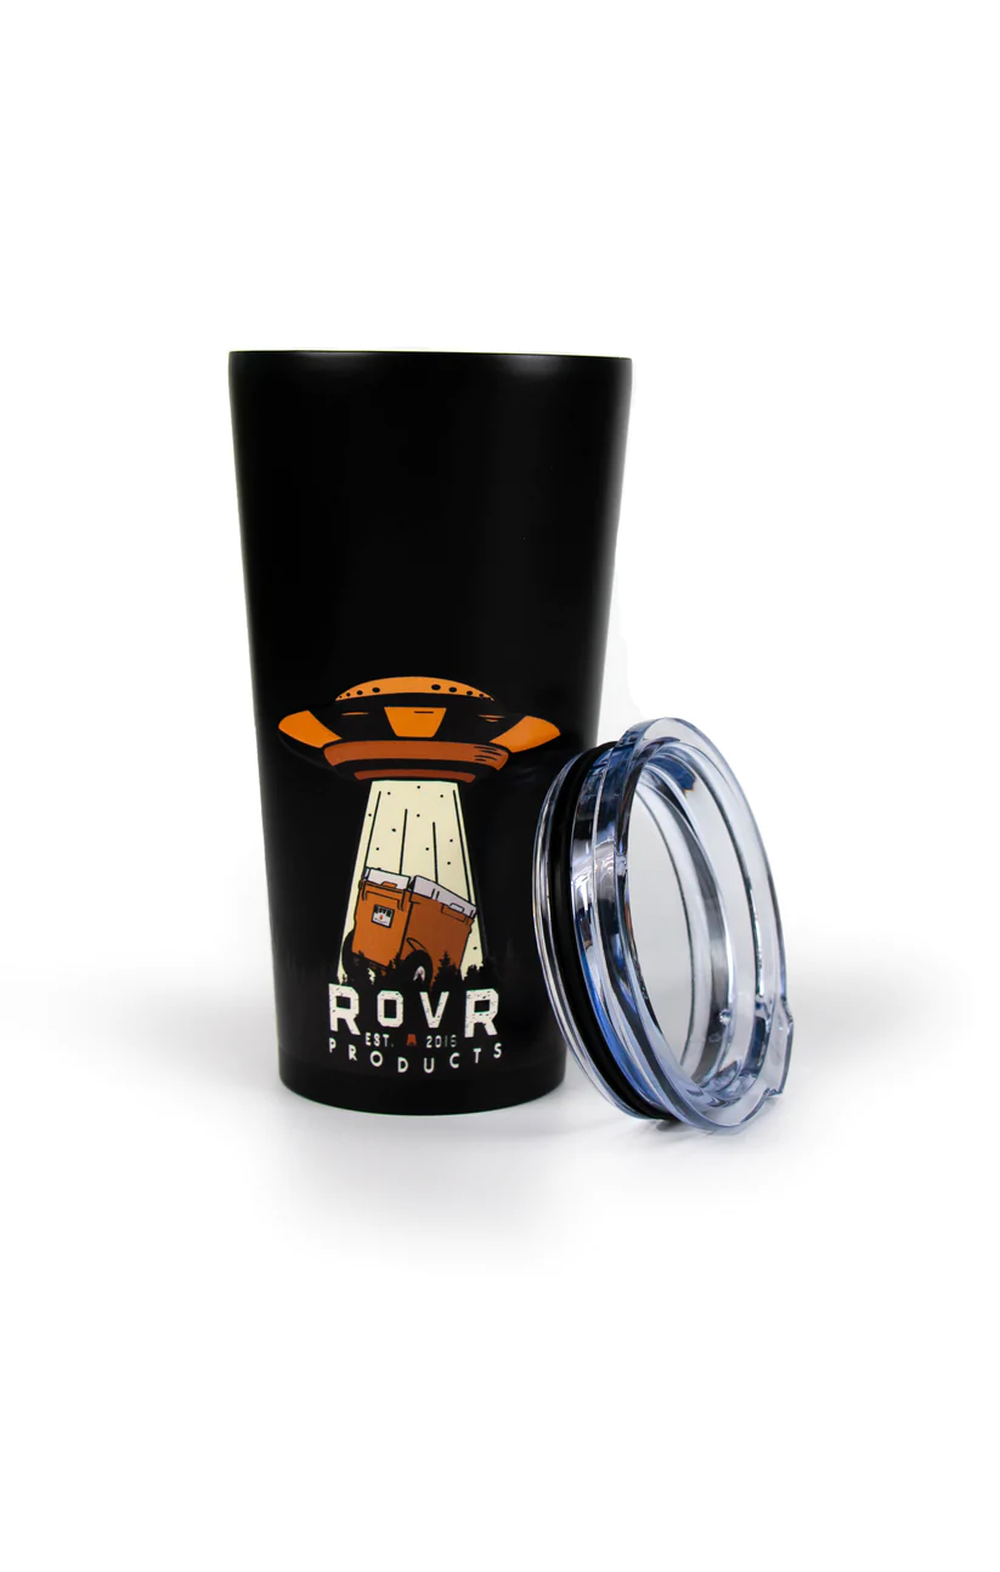 RovR - Single Wall Stainless Steel 4 pack Cup Set RovR Chilliwack BBQ Supply